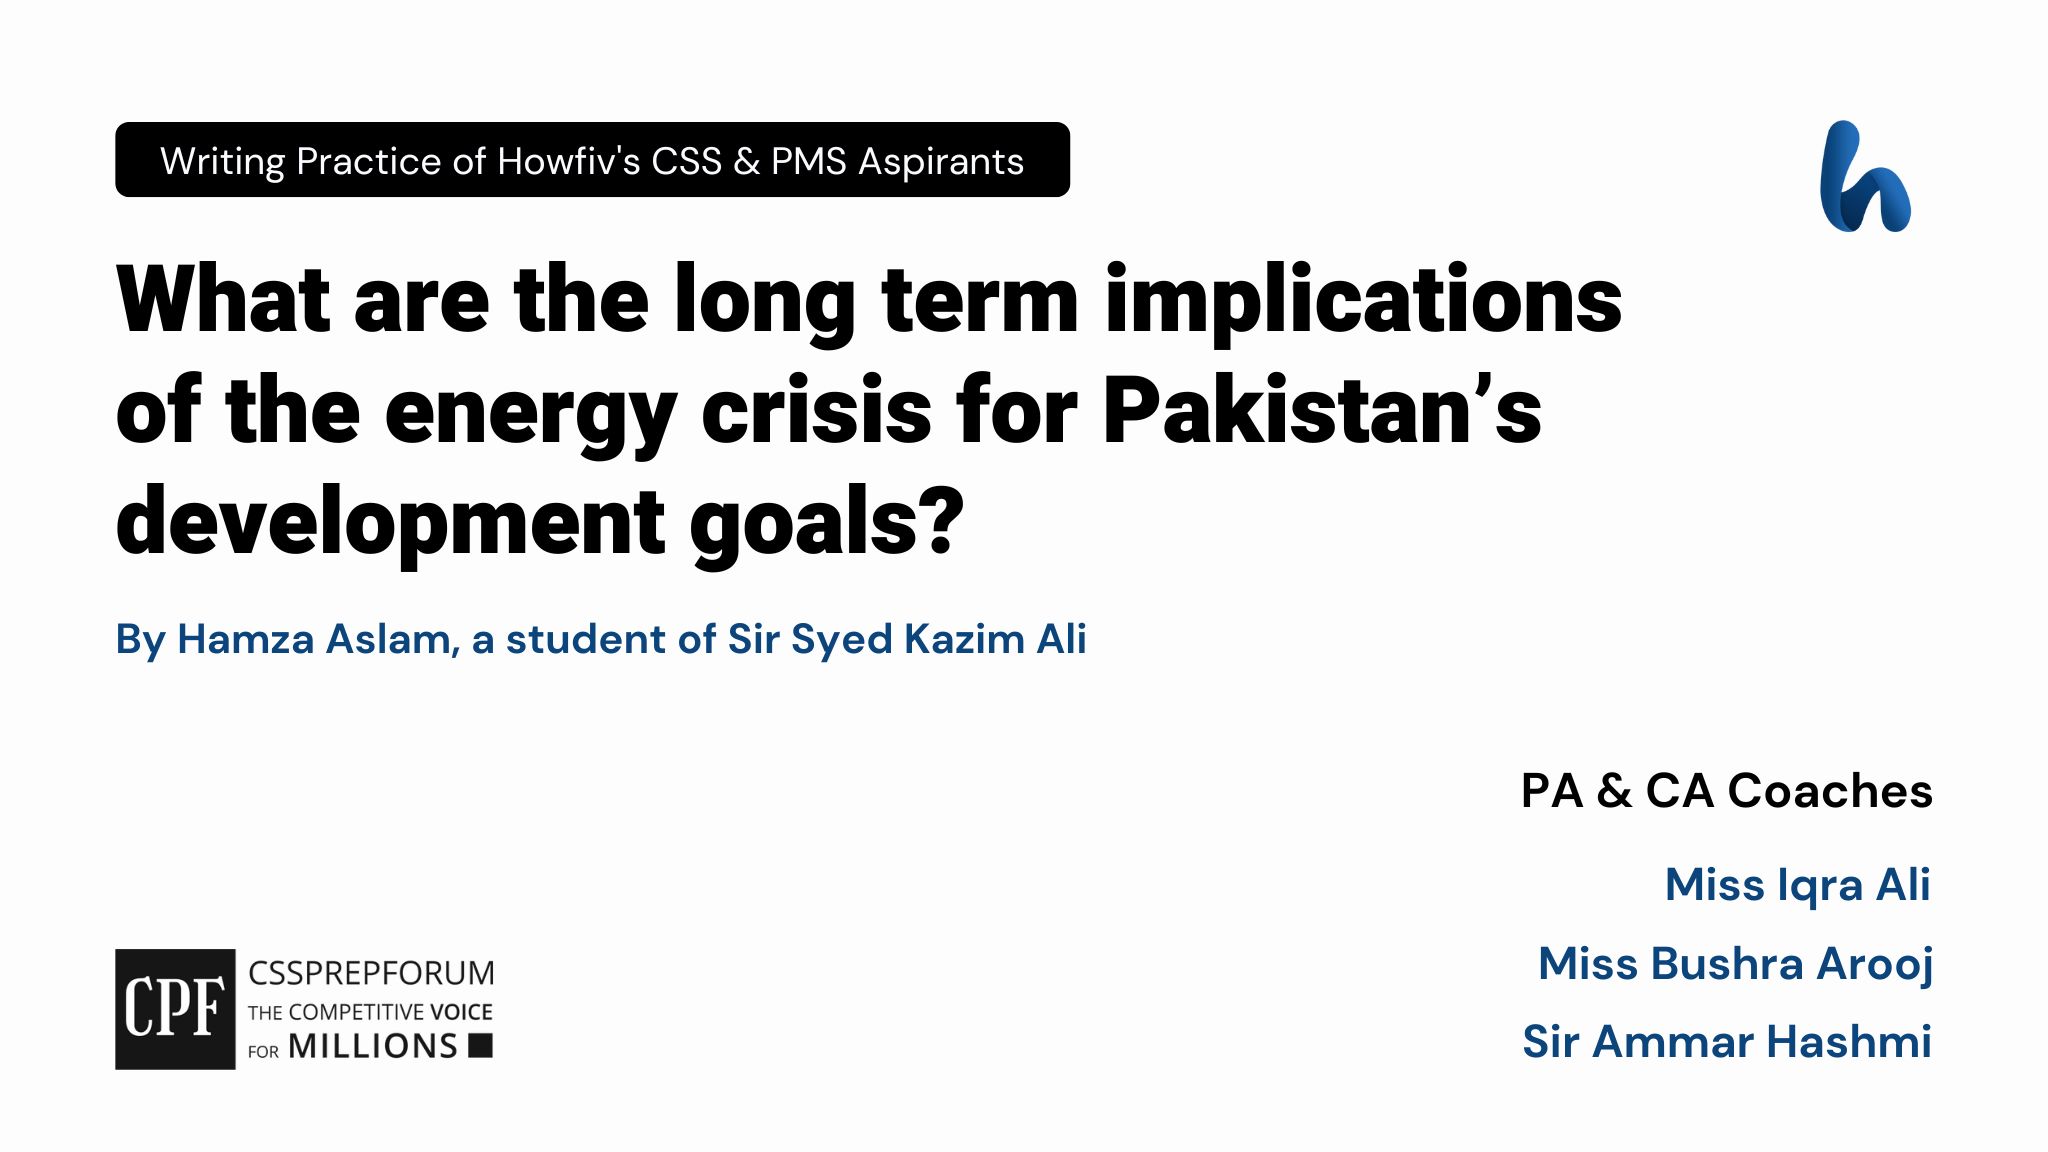 What are the long term implications of the energy crisis for Pakistan’s development goals